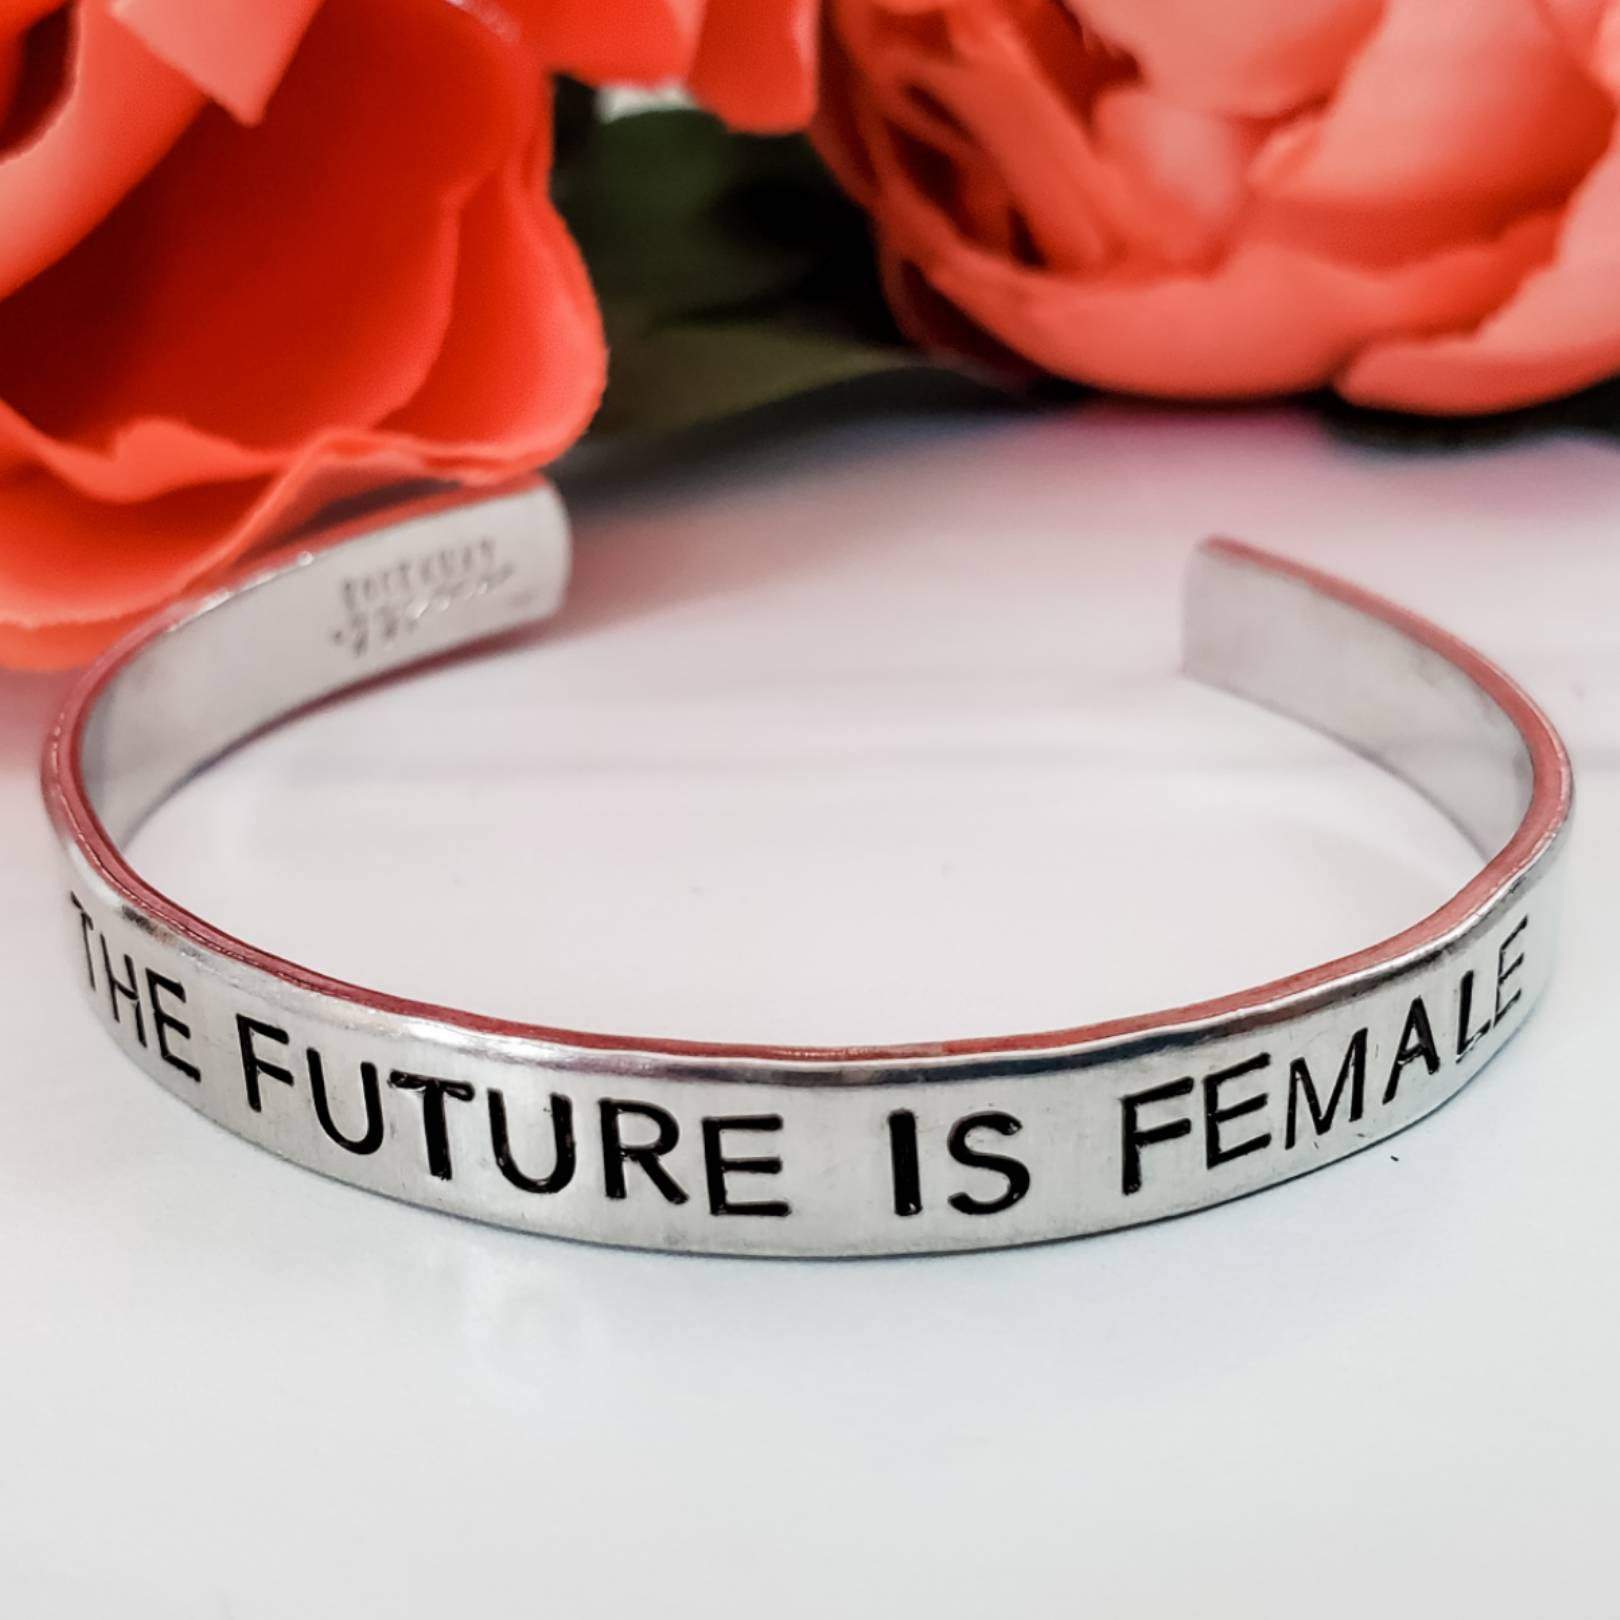 THE FUTURE IS FEMALE Stacking Cuff Bracelet Salt and Sparkle